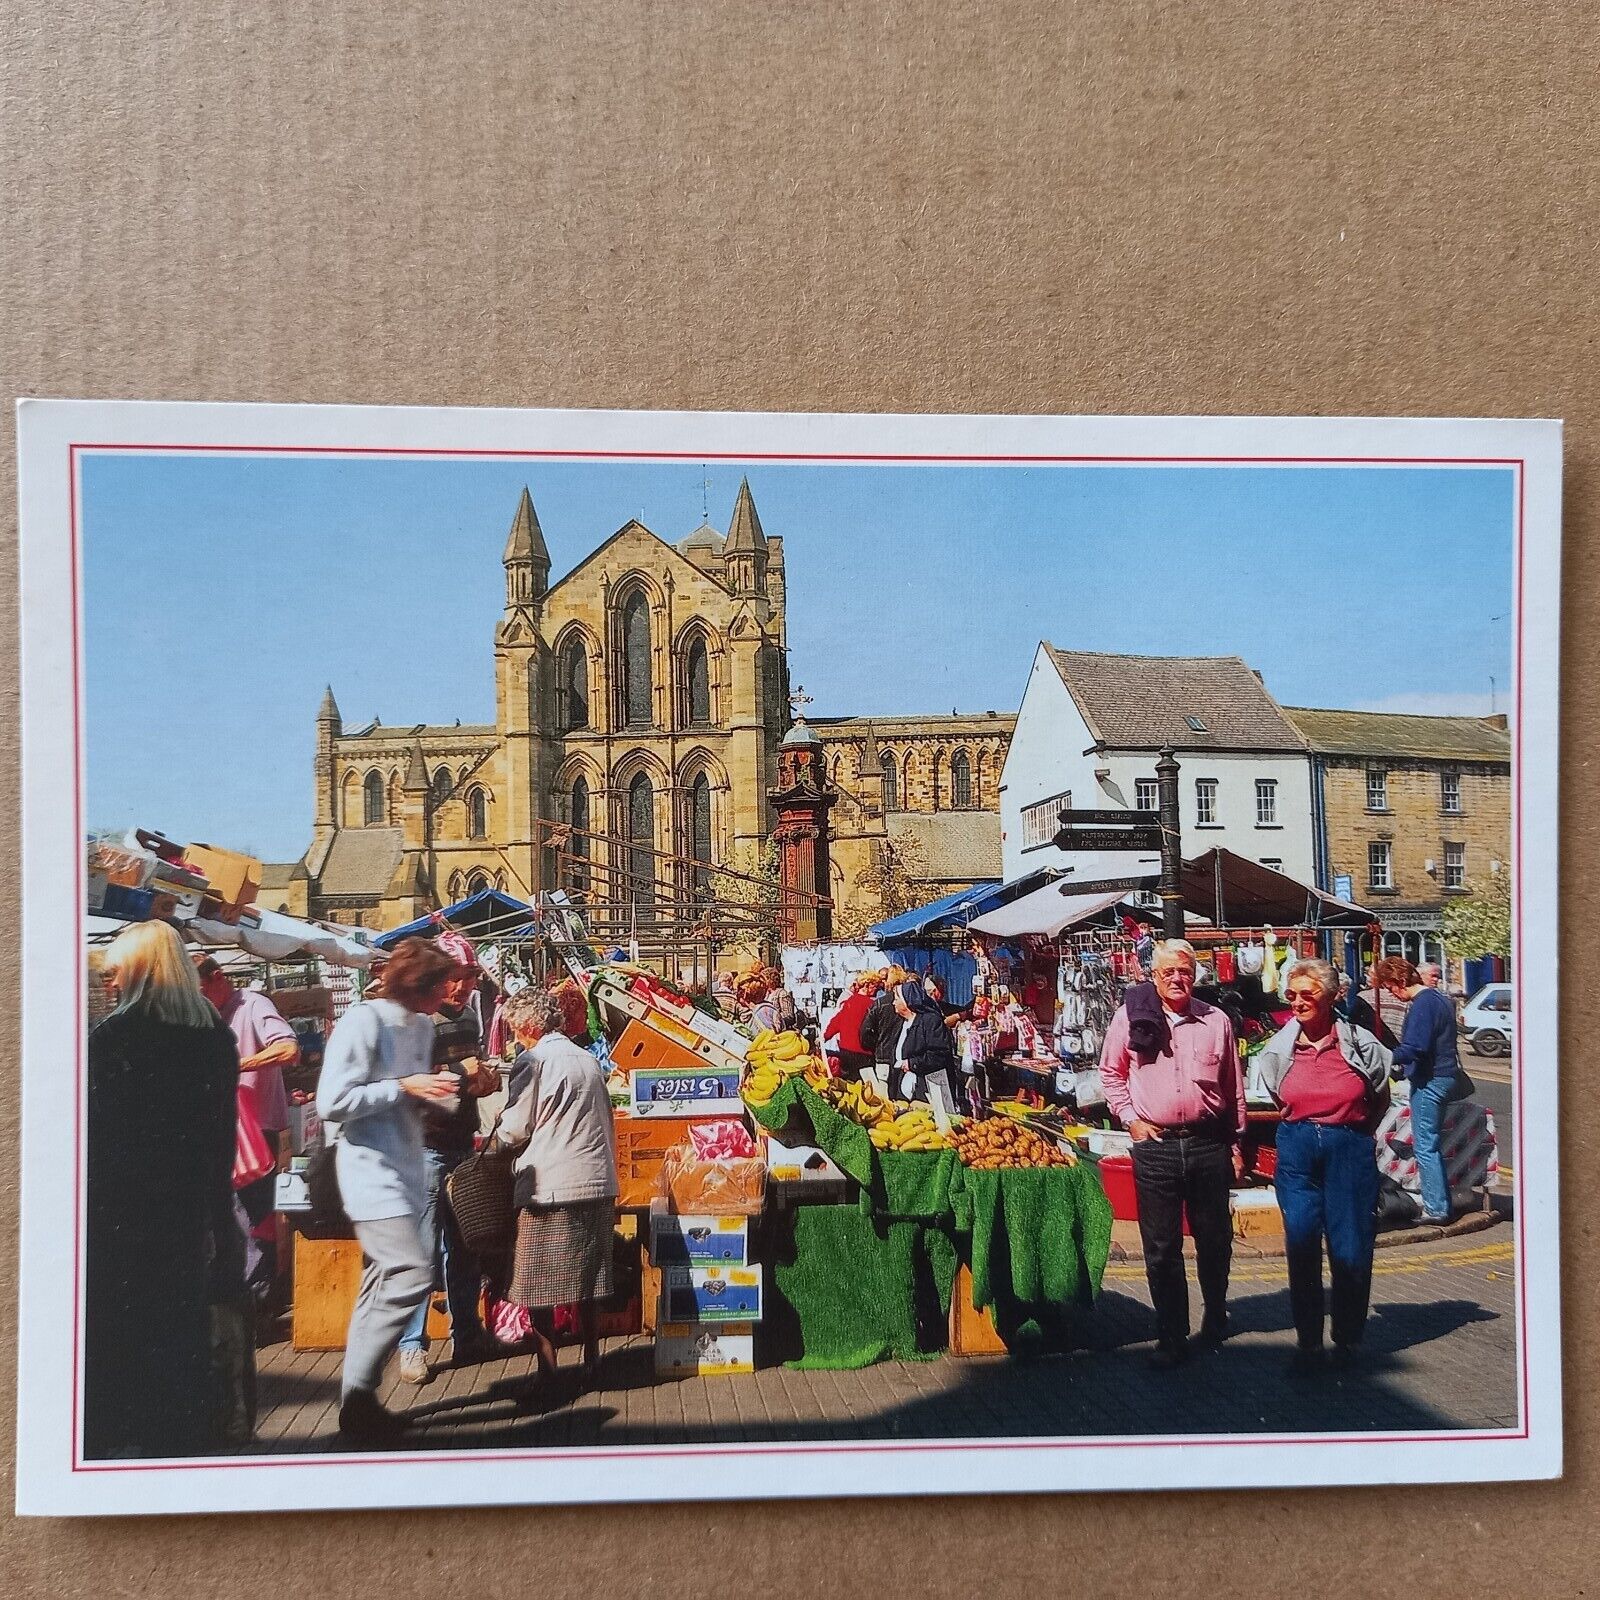 House Clearance - Service Hexham Abbey and Market Place Northumberland Service